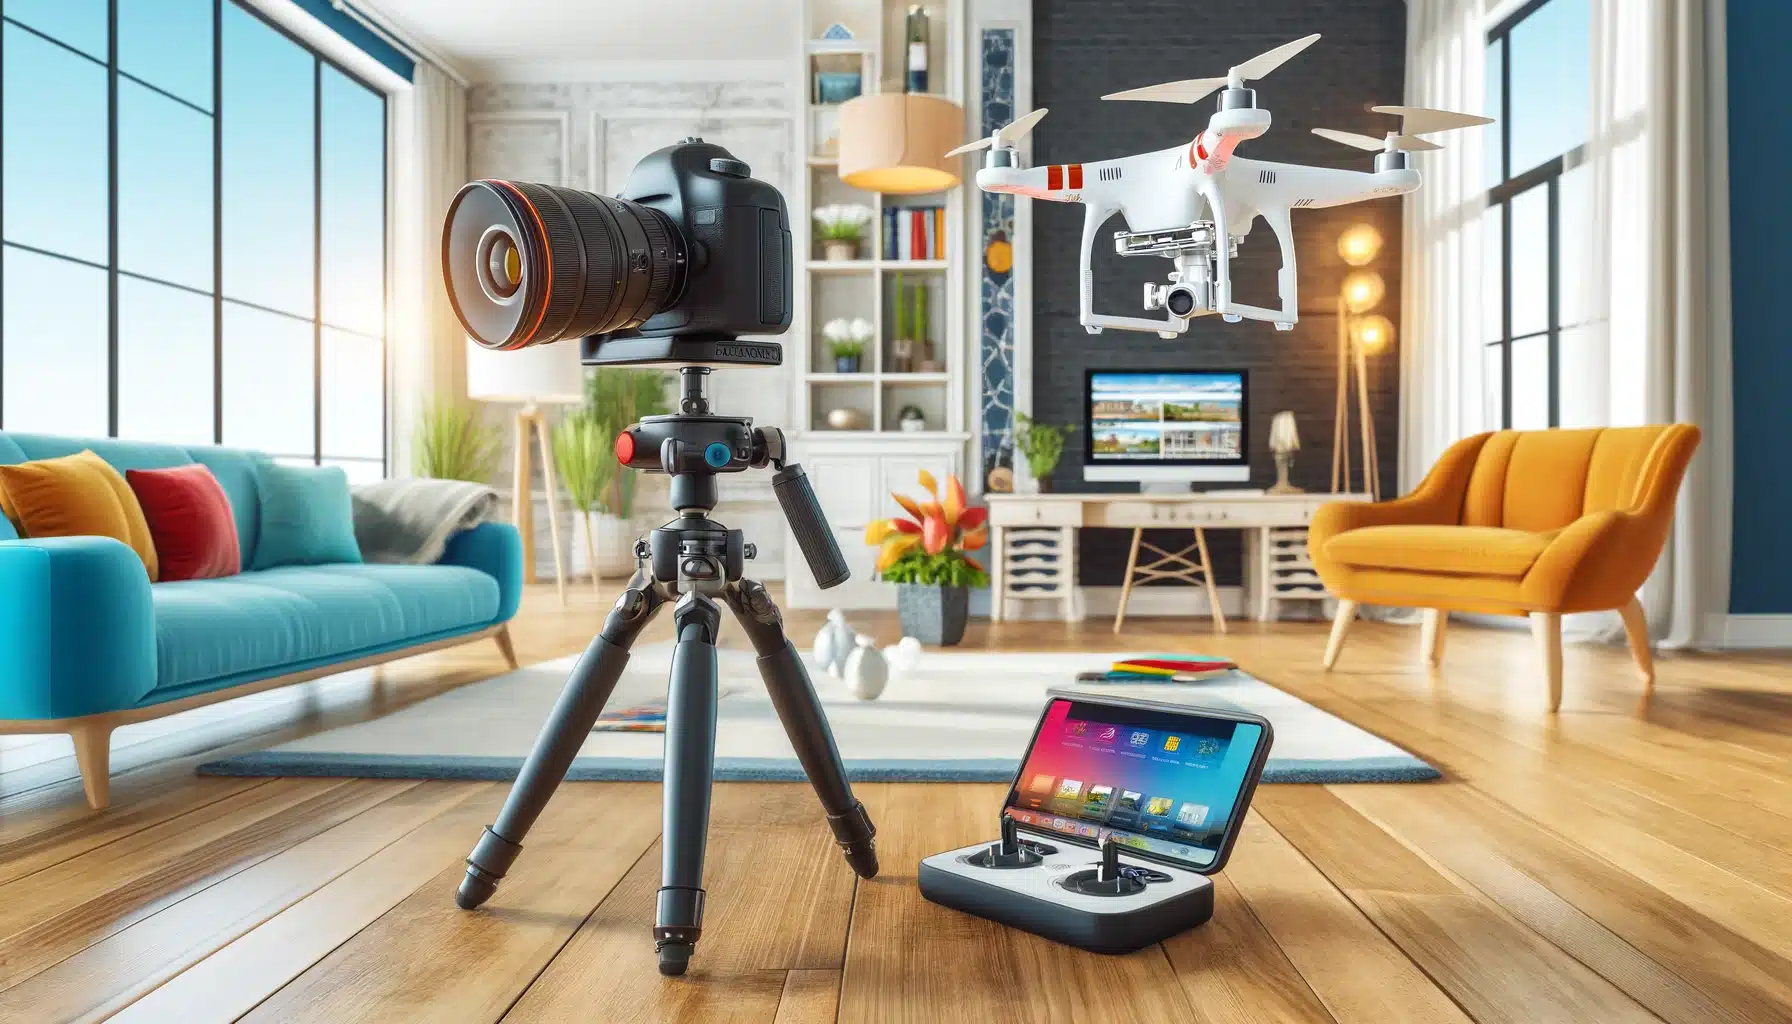 DSLR camera on a tripod, modern smartphone, and drone in a stylish living room with vibrant decor and natural light